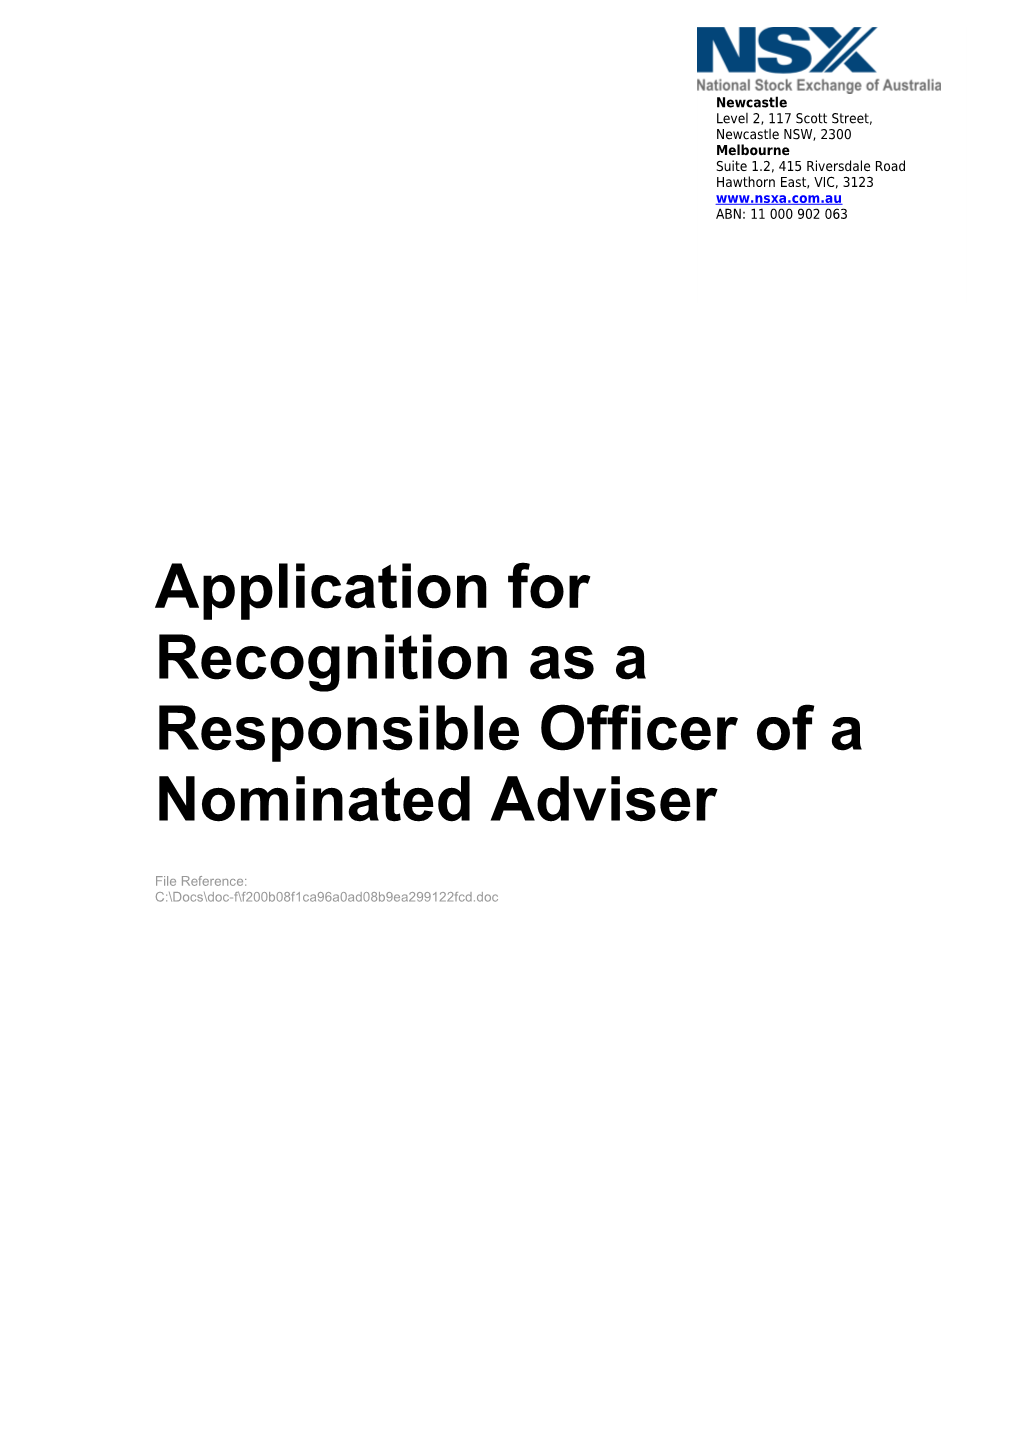 Application for Recognition As a Responsible Officer of a Nominated Adviser